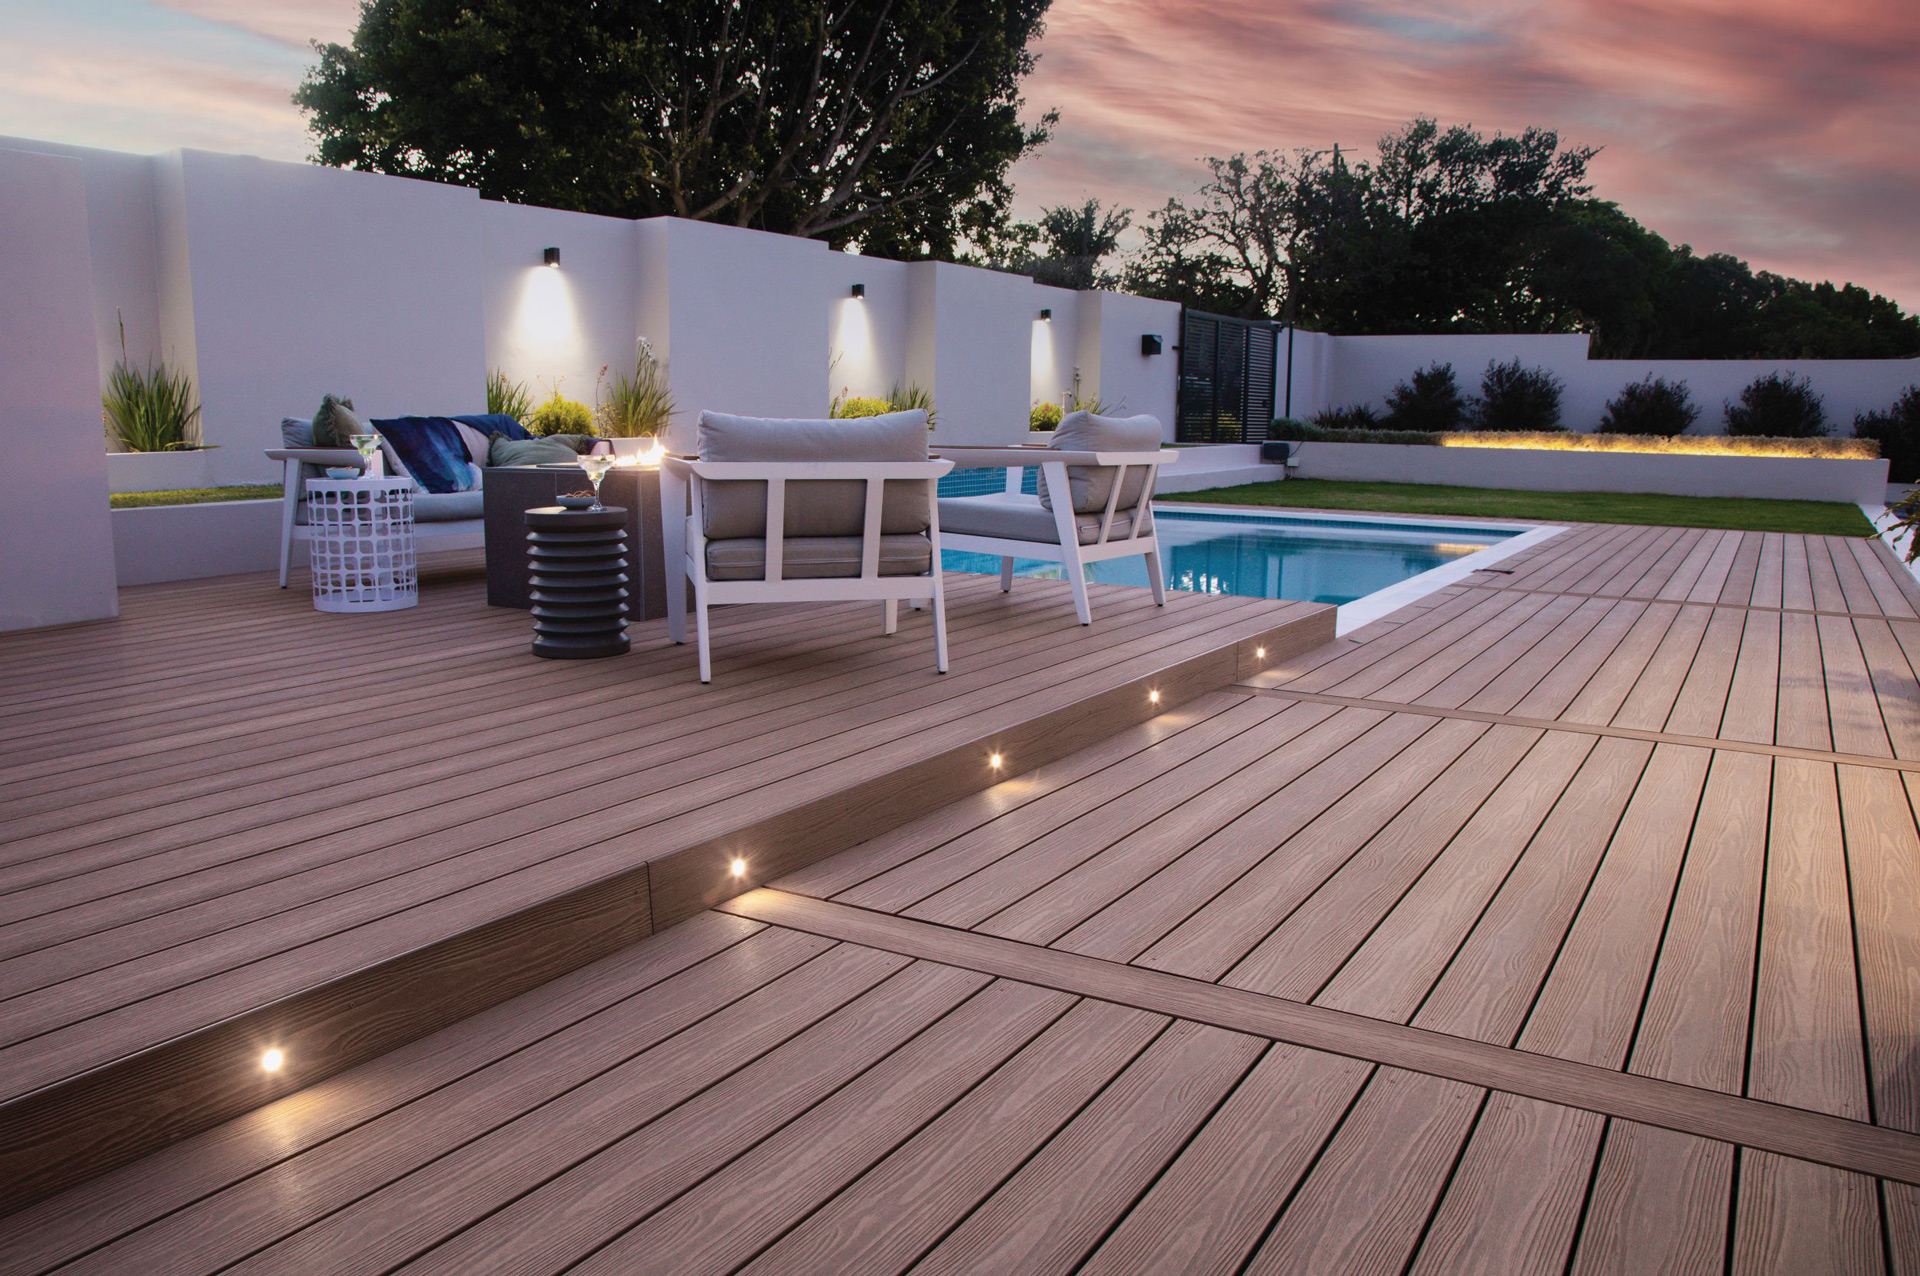 Ground level composite deck surrounding a pool